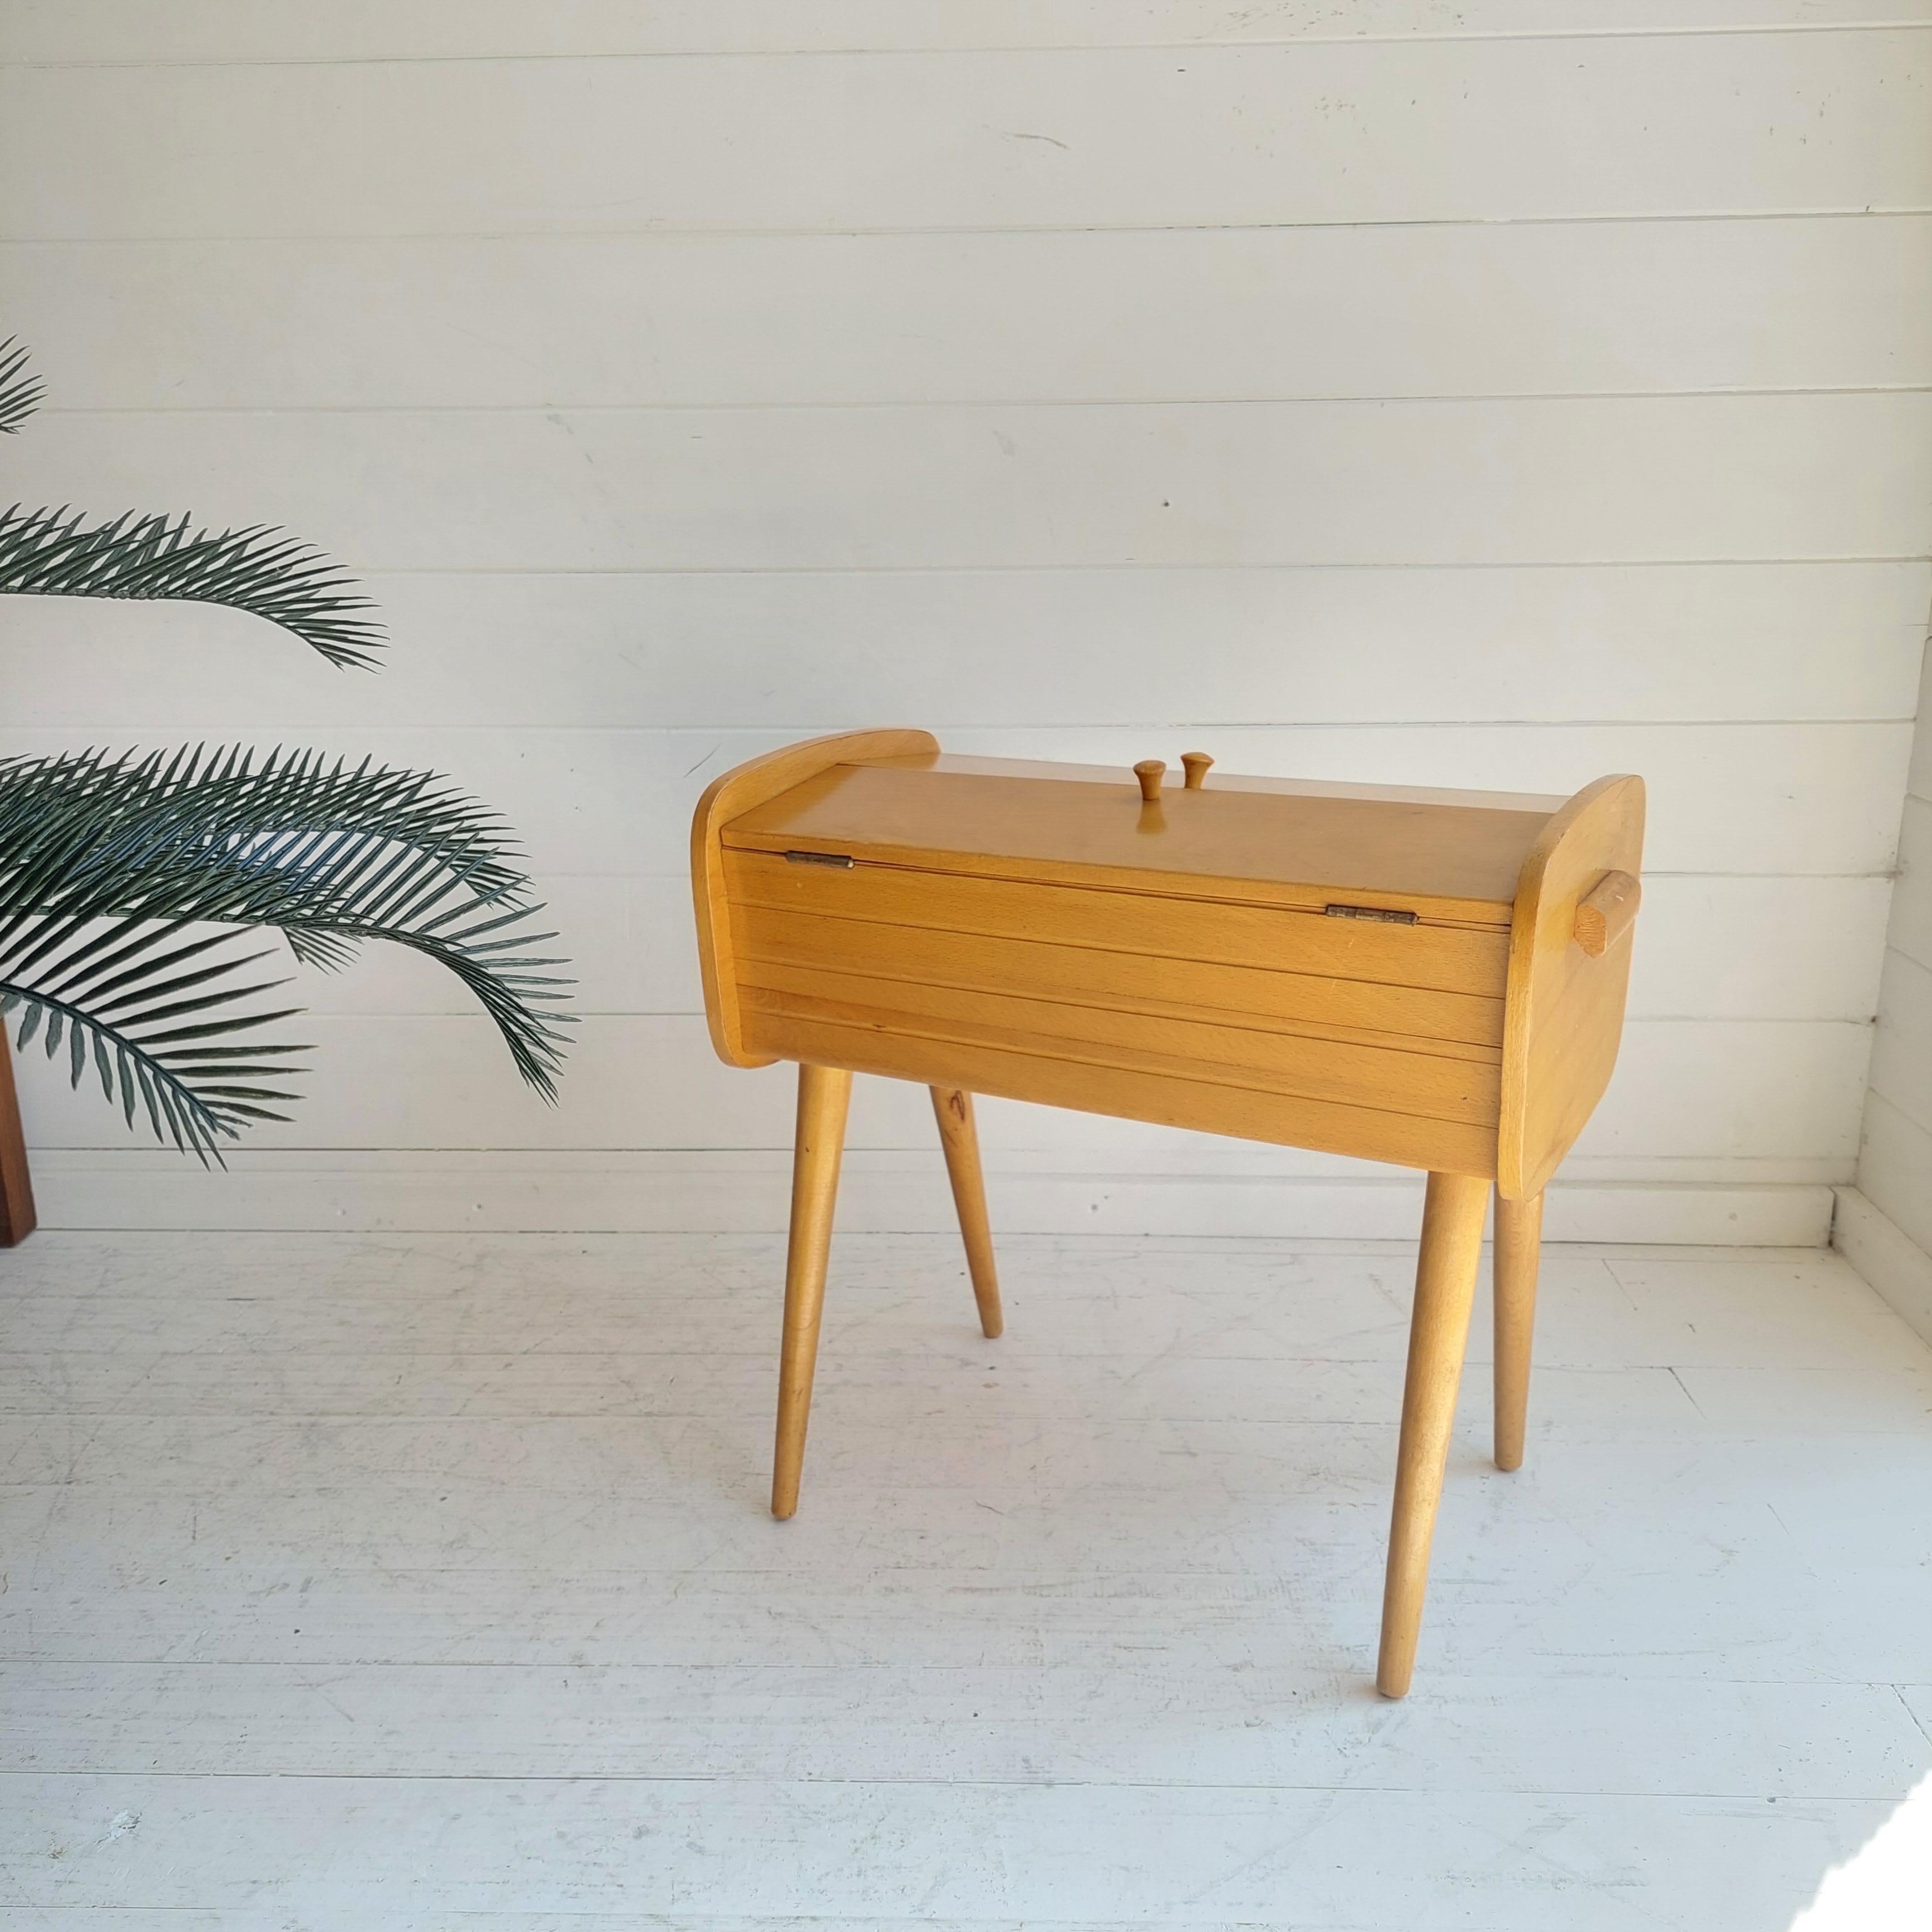 Elegant midcentury Danish-styled storage - Sewing Box
Scandinavian design Made of beech
Period 1950-1960s

Perfect for jewellery, sewing or knitting bits and bobs.
This design is becoming more rare.

A lovely midcentury teak sewing box of